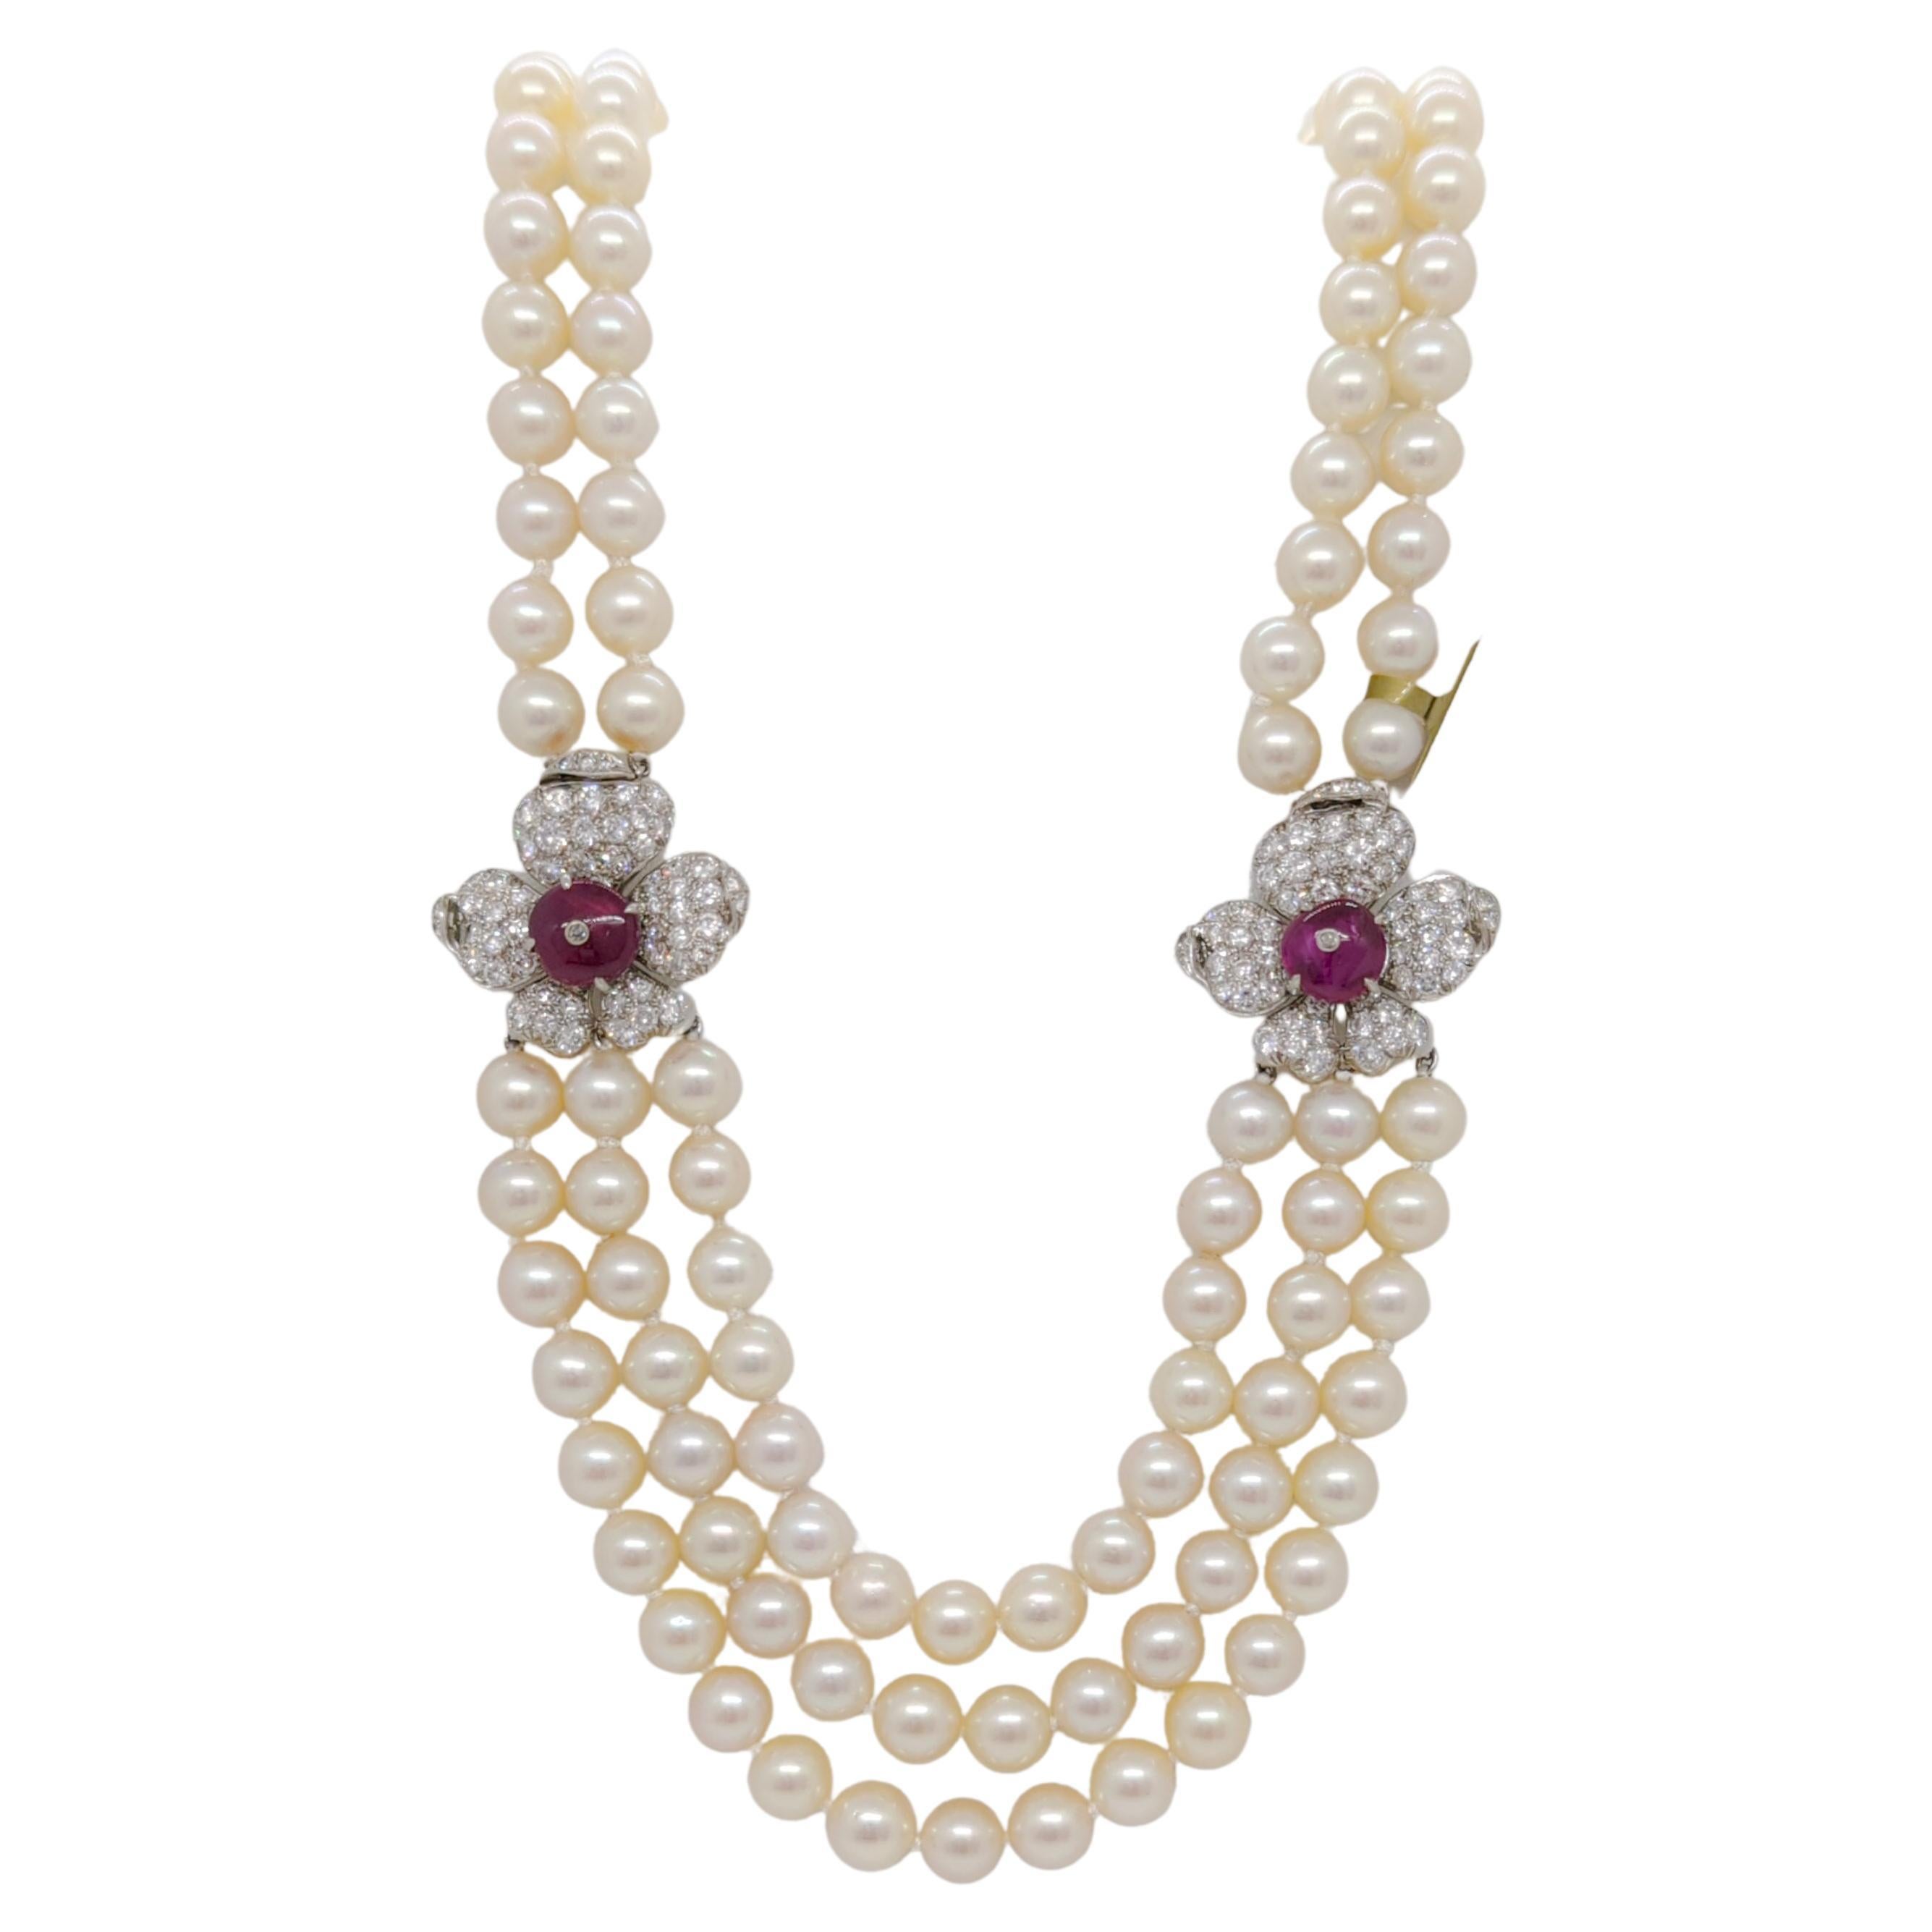 Estate Marianne Ostier AGL Burma Red Ruby and Diamond Pearl Necklace 